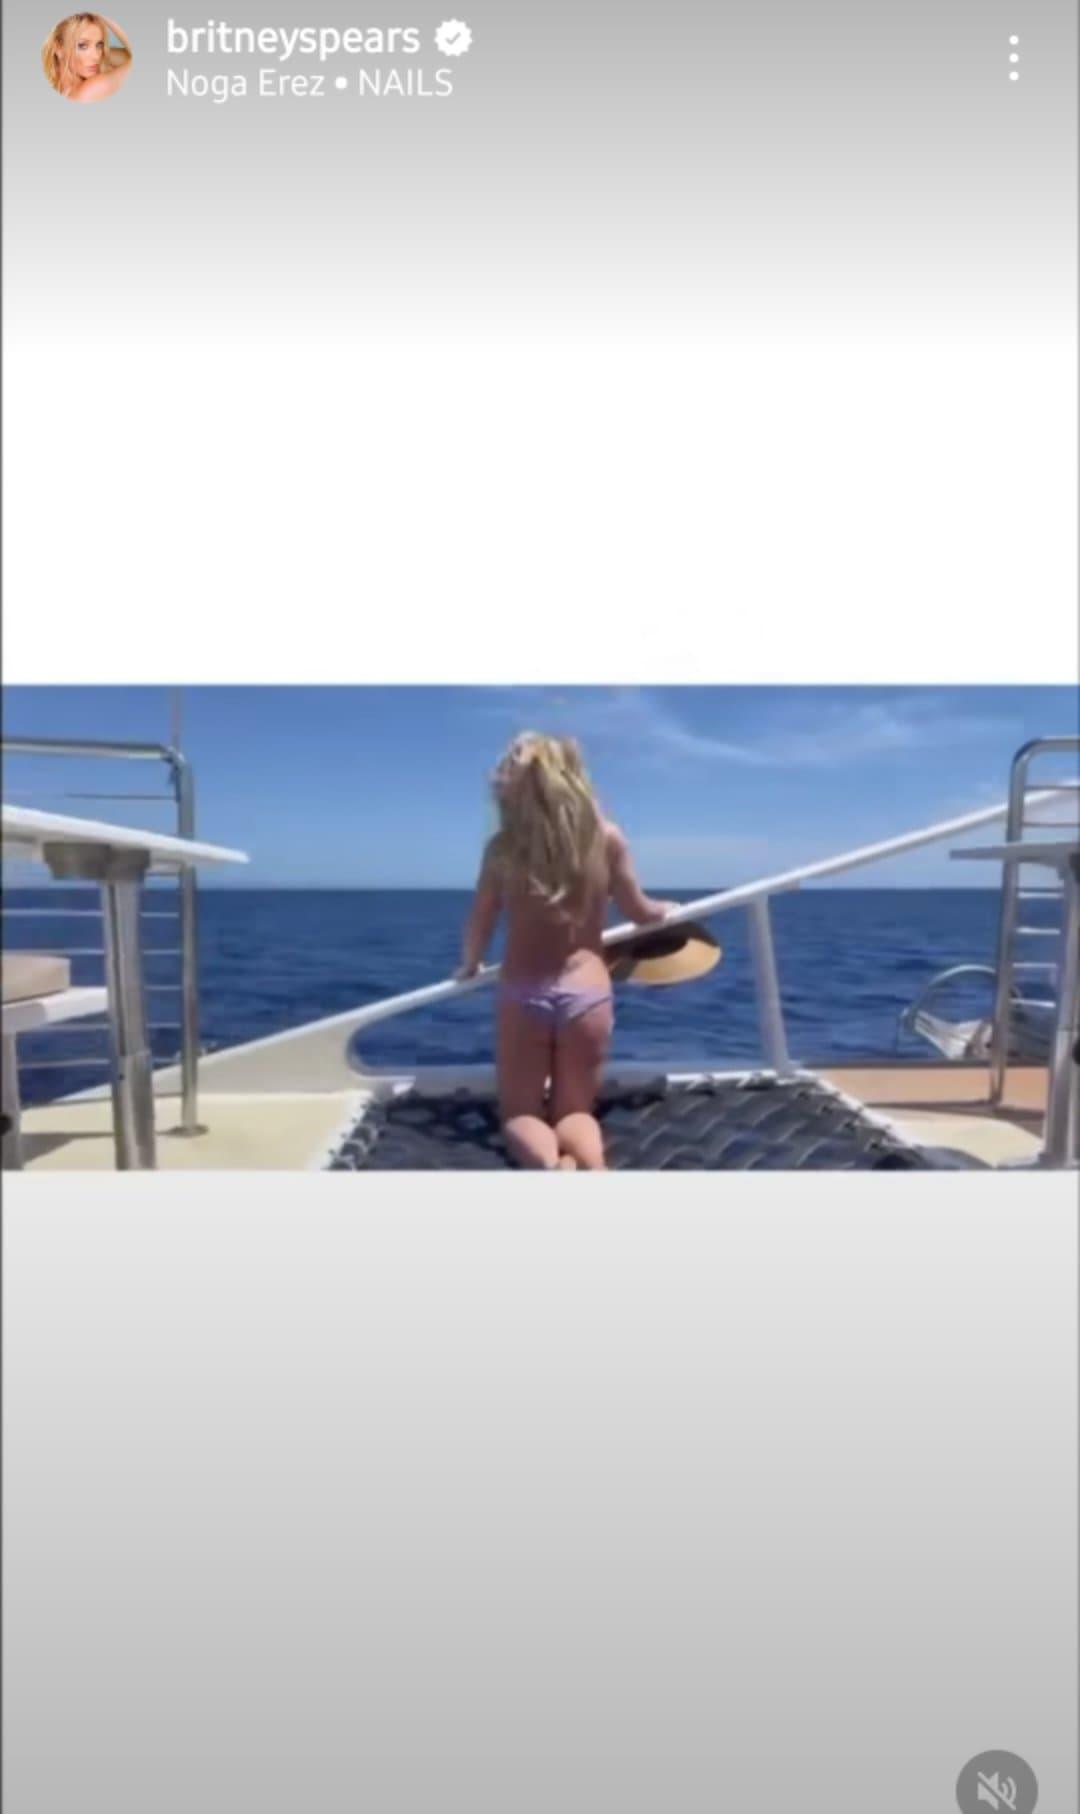 Britney Spears goes sailing on July 30, 2022